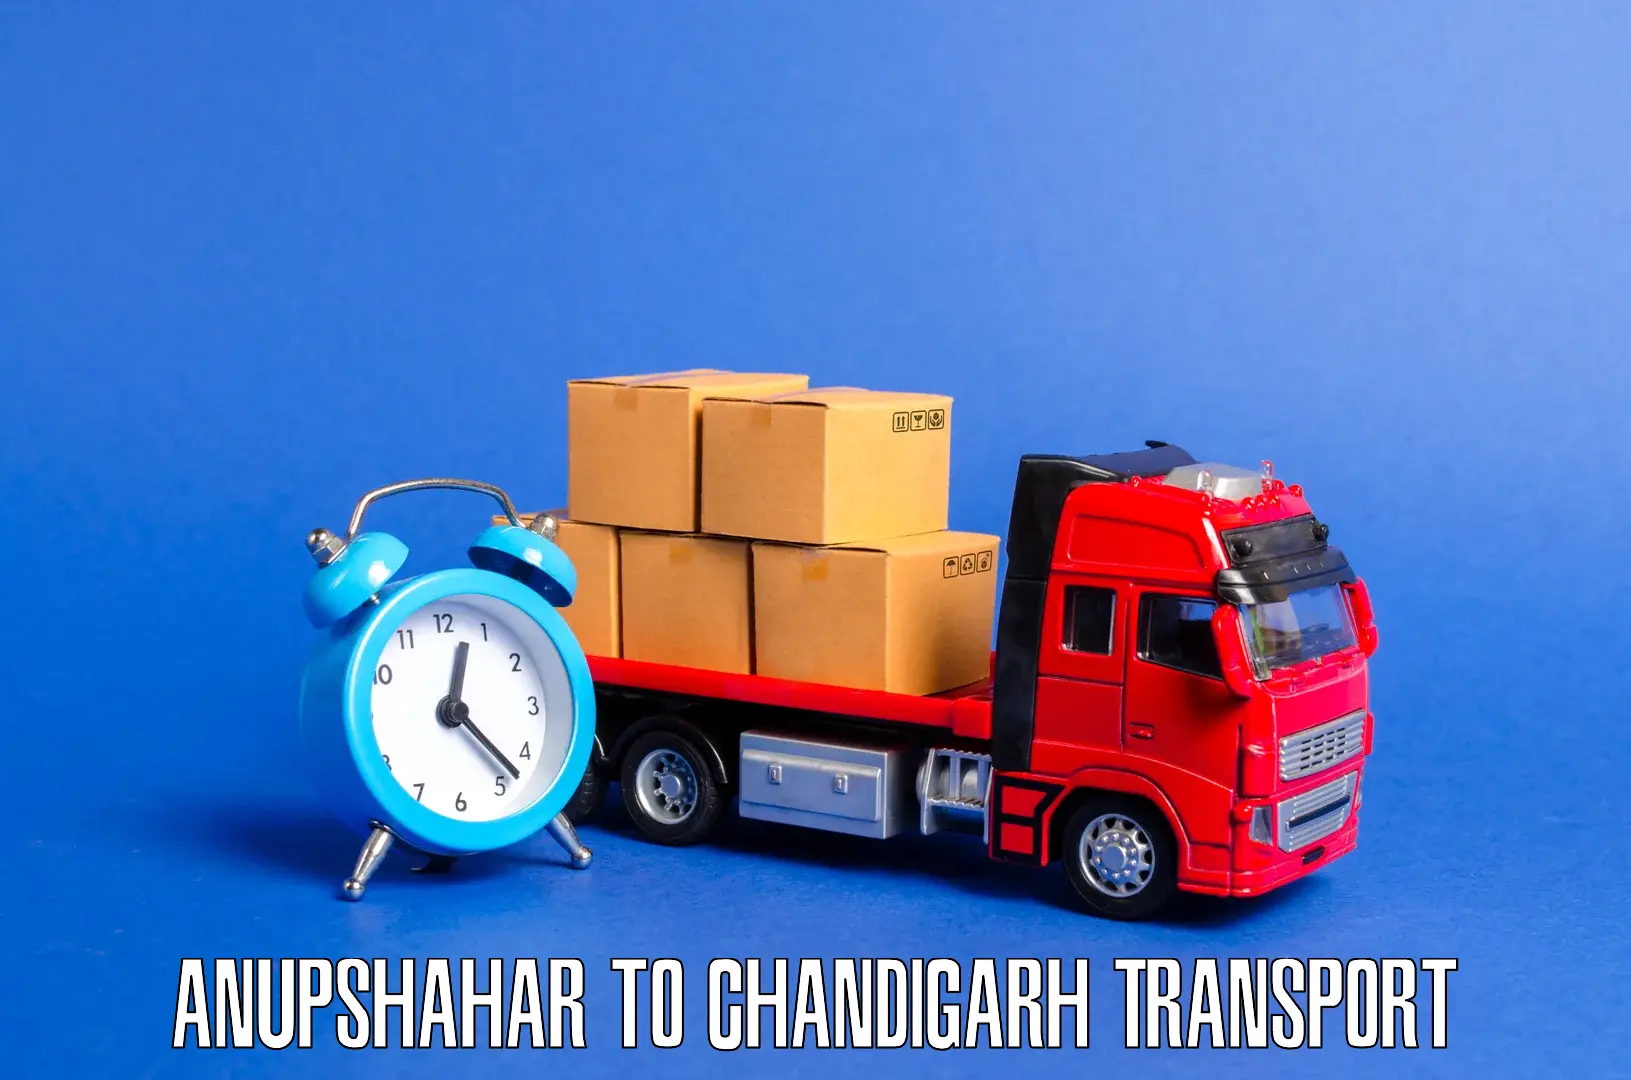 Commercial transport service Anupshahar to Chandigarh